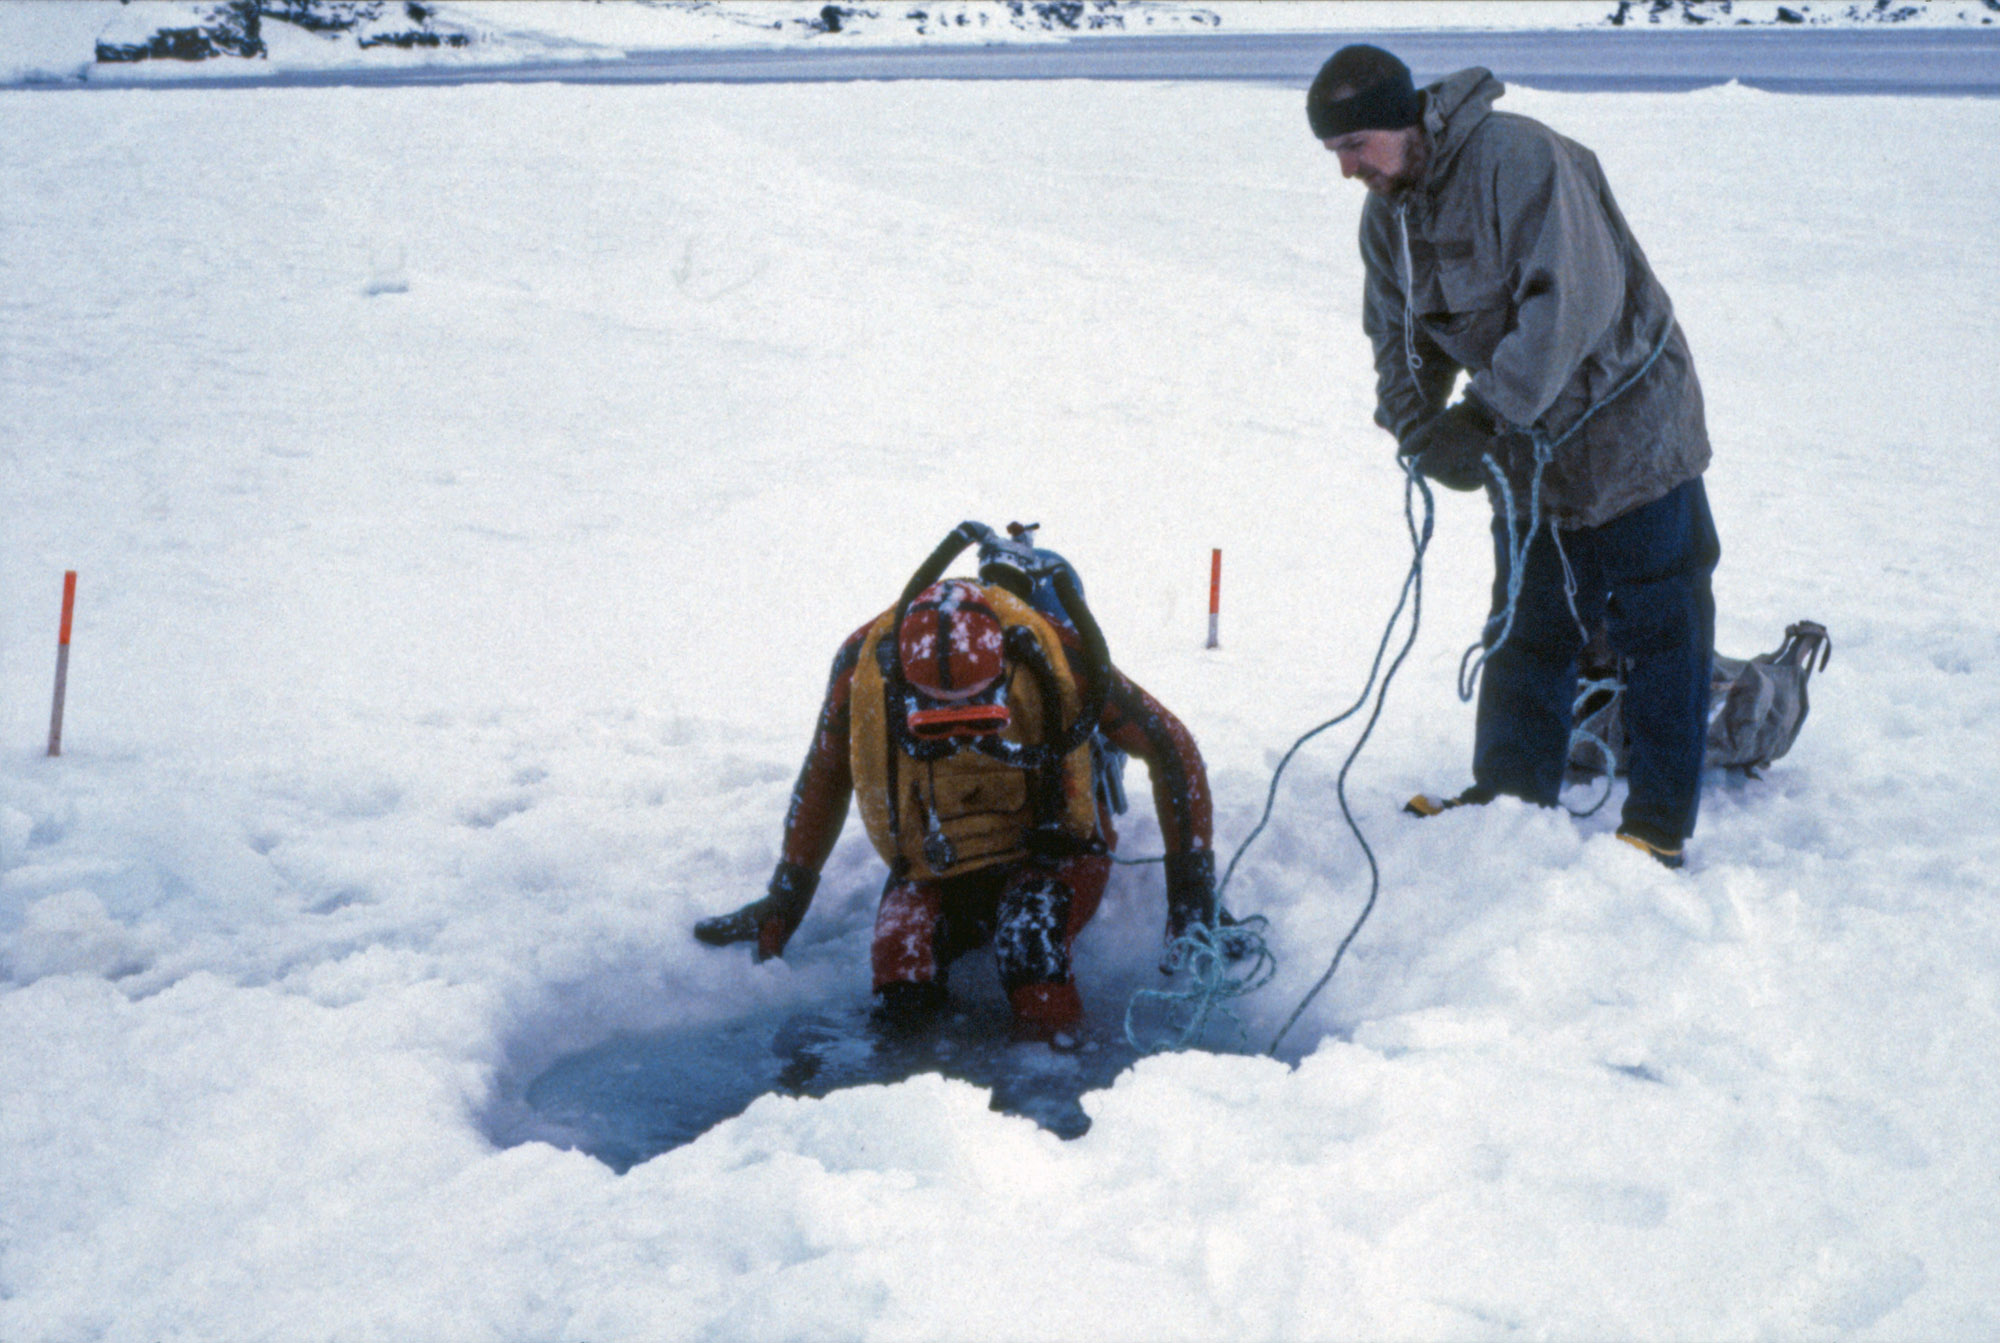 Diving, Roped-Up for Under Ice